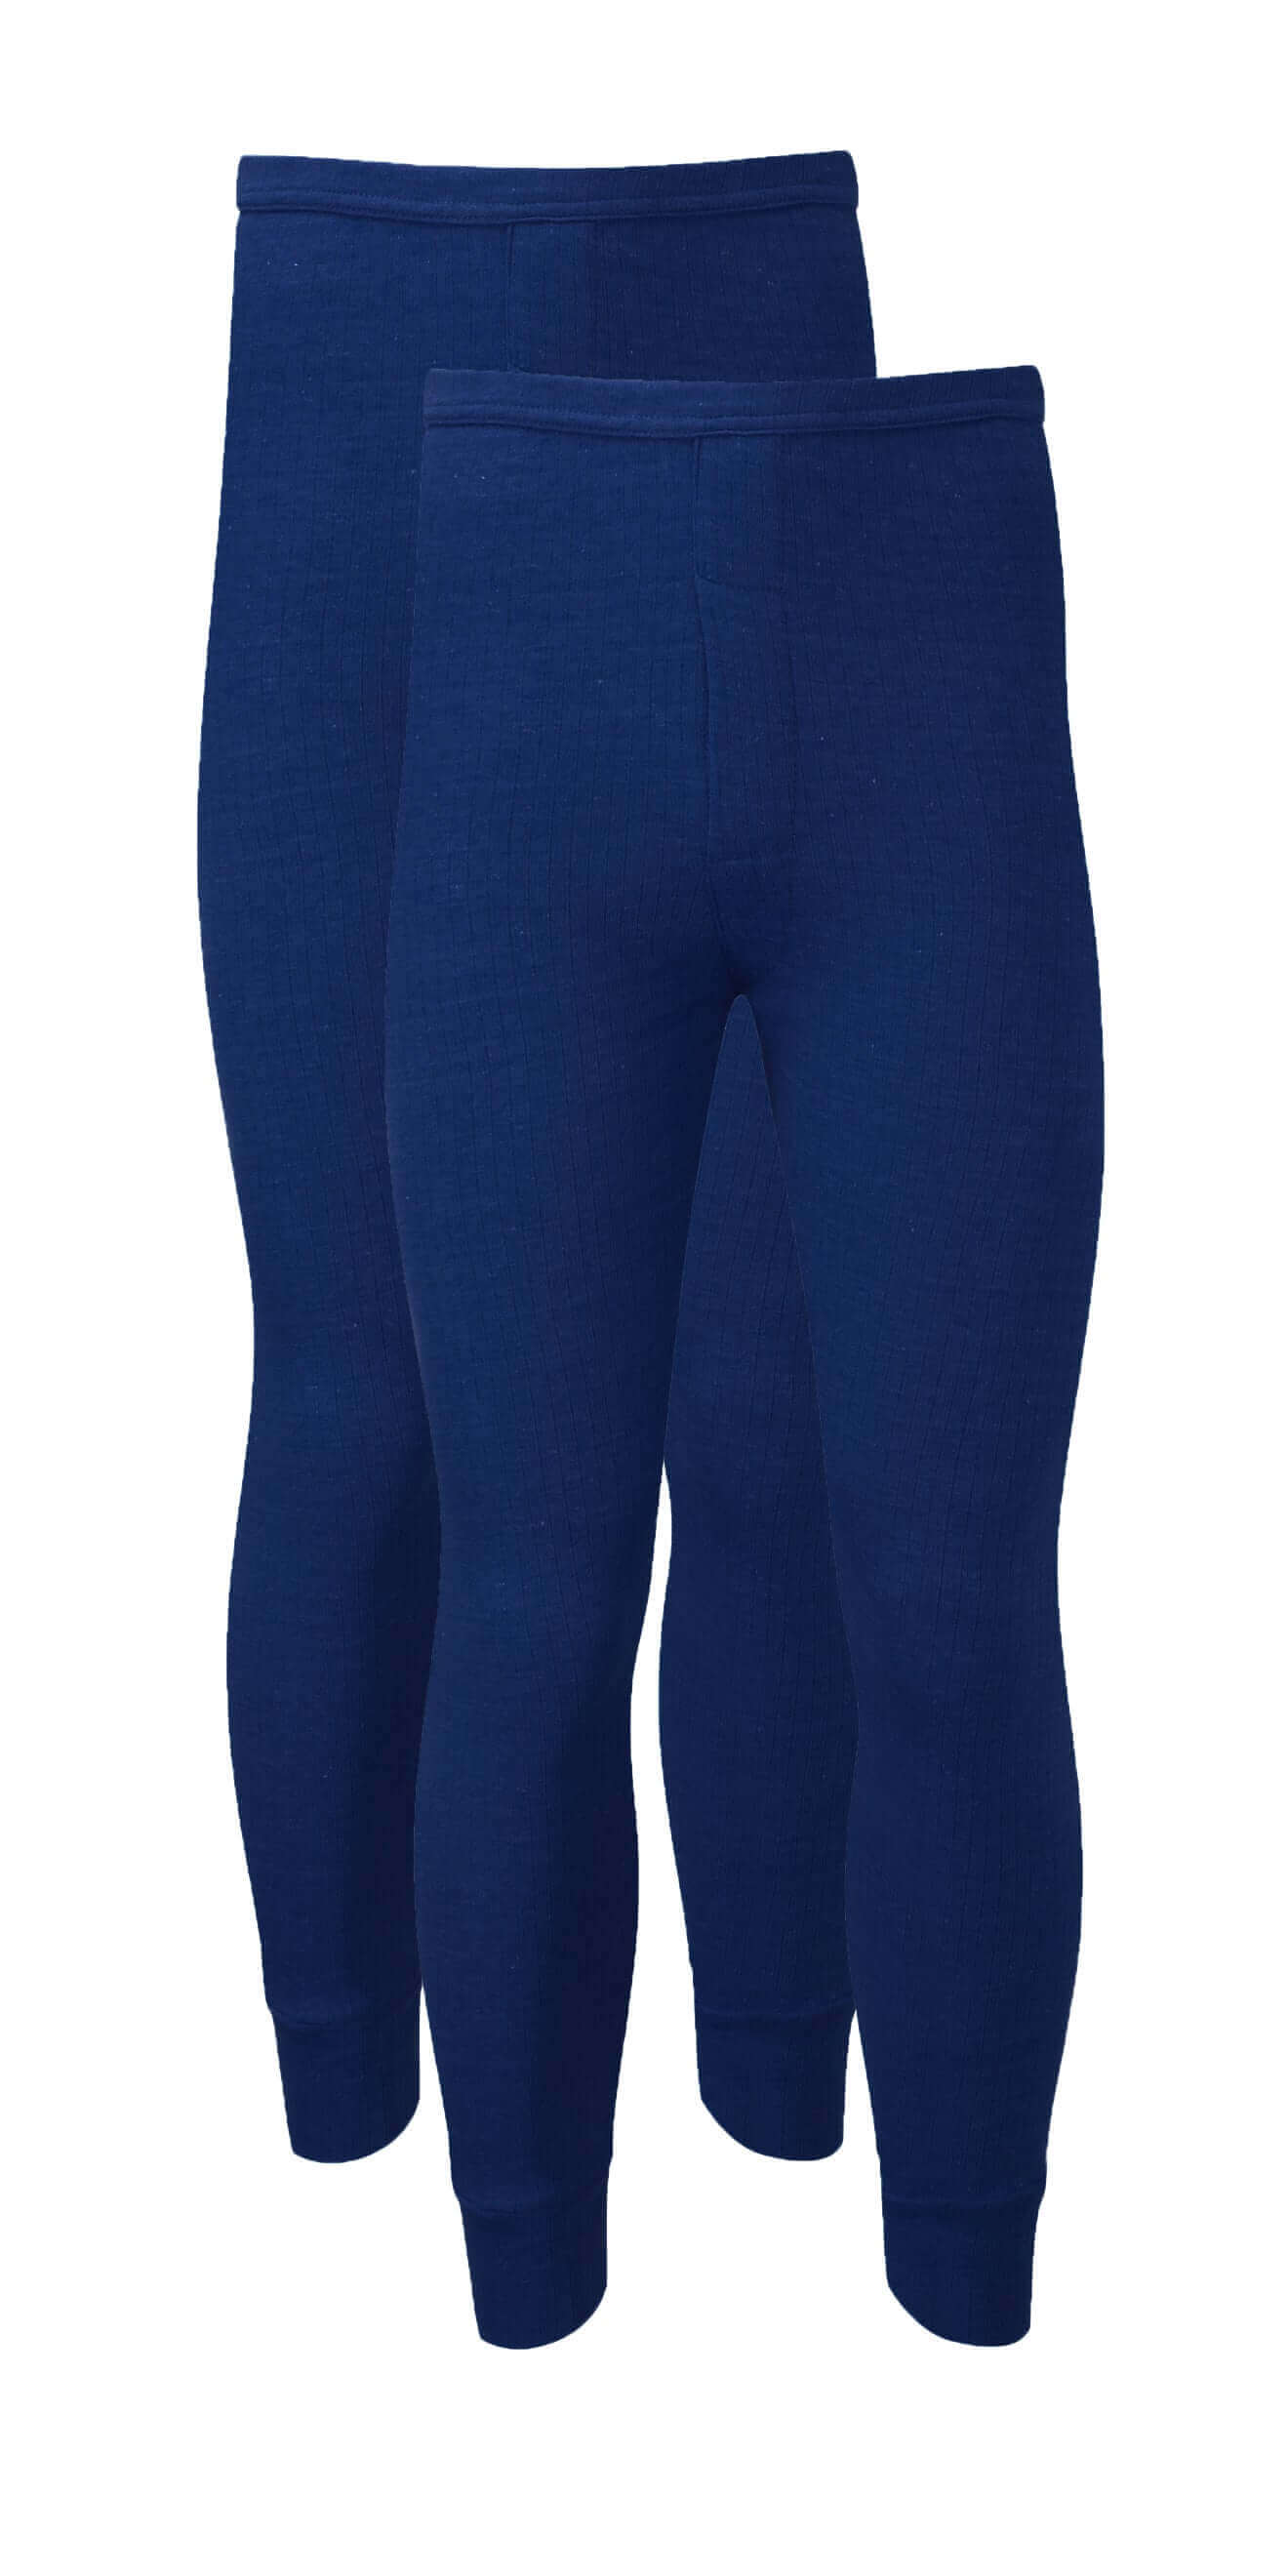 Heatwave® Pack Of 2 Men's Thermal Trousers Long Johns, Warm Underwear Set. Buy now for £10.00. A Thermal Underwear by Heatwave Thermalwear. baselayer, black, blue, charcoal, grey, heatwave, hiking, large, long johns, long sleeve, marl grey, medium, mens,